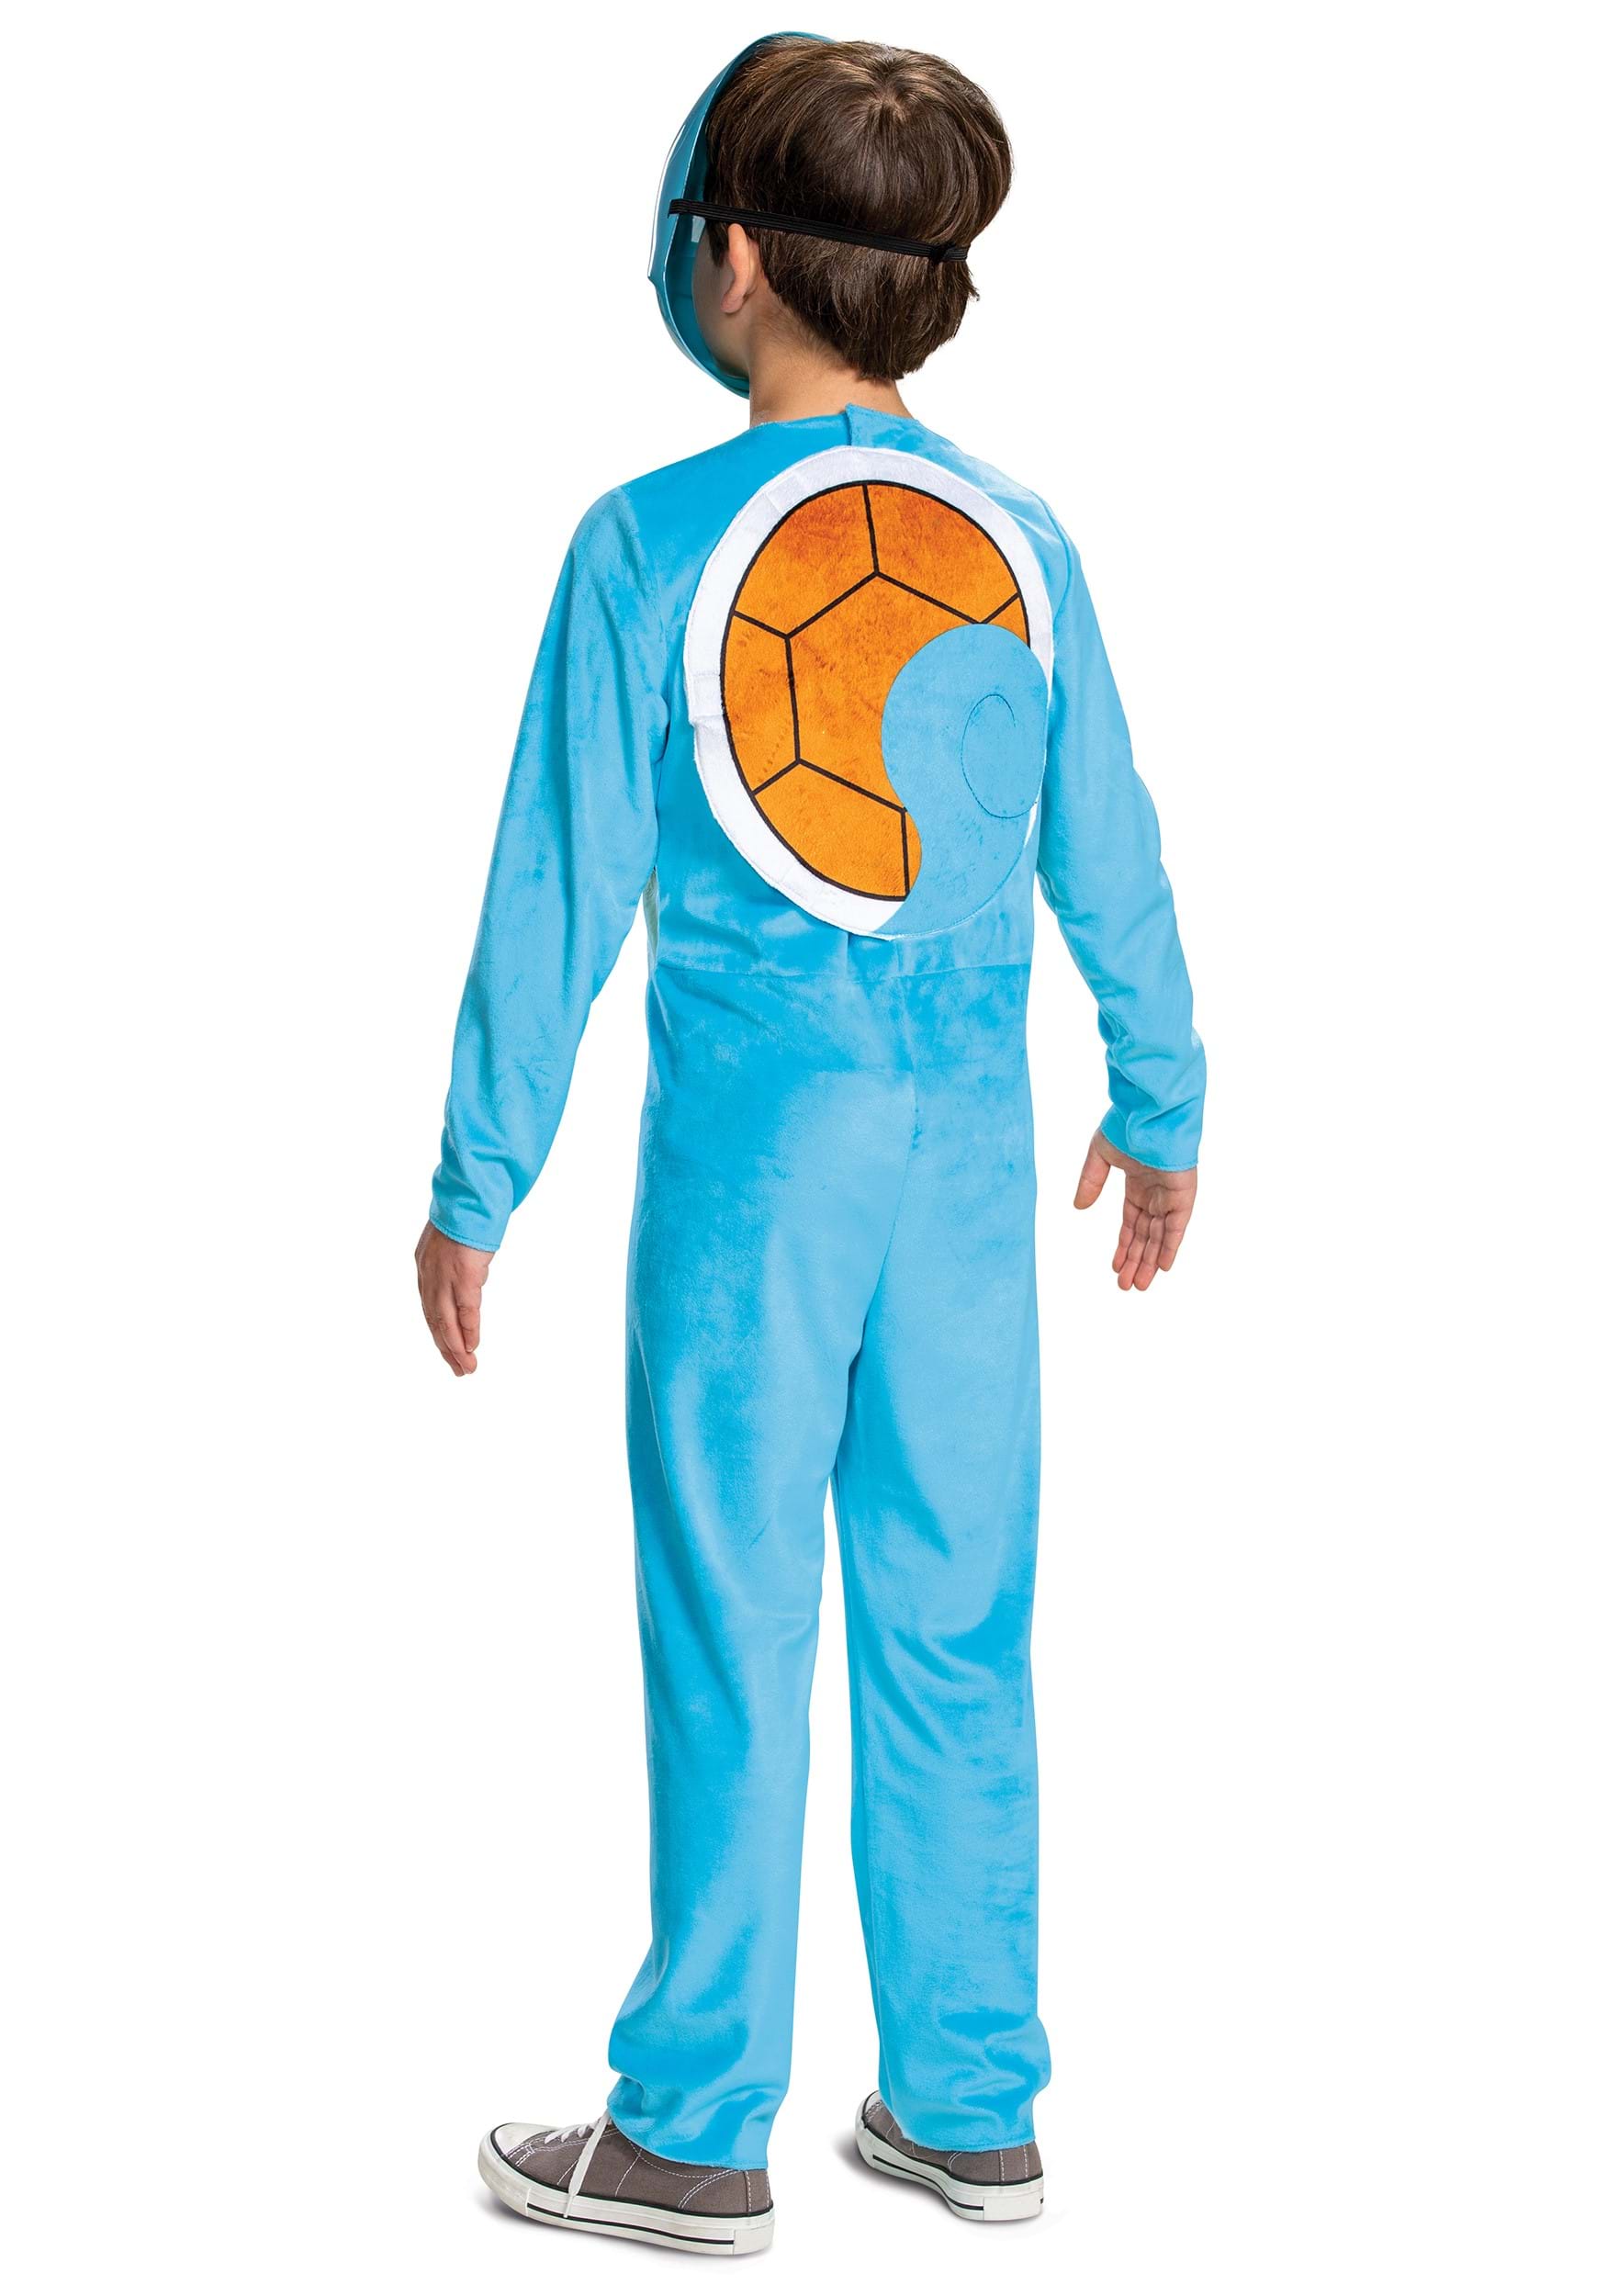 Pokémon Classic Squirtle Costume For Kids